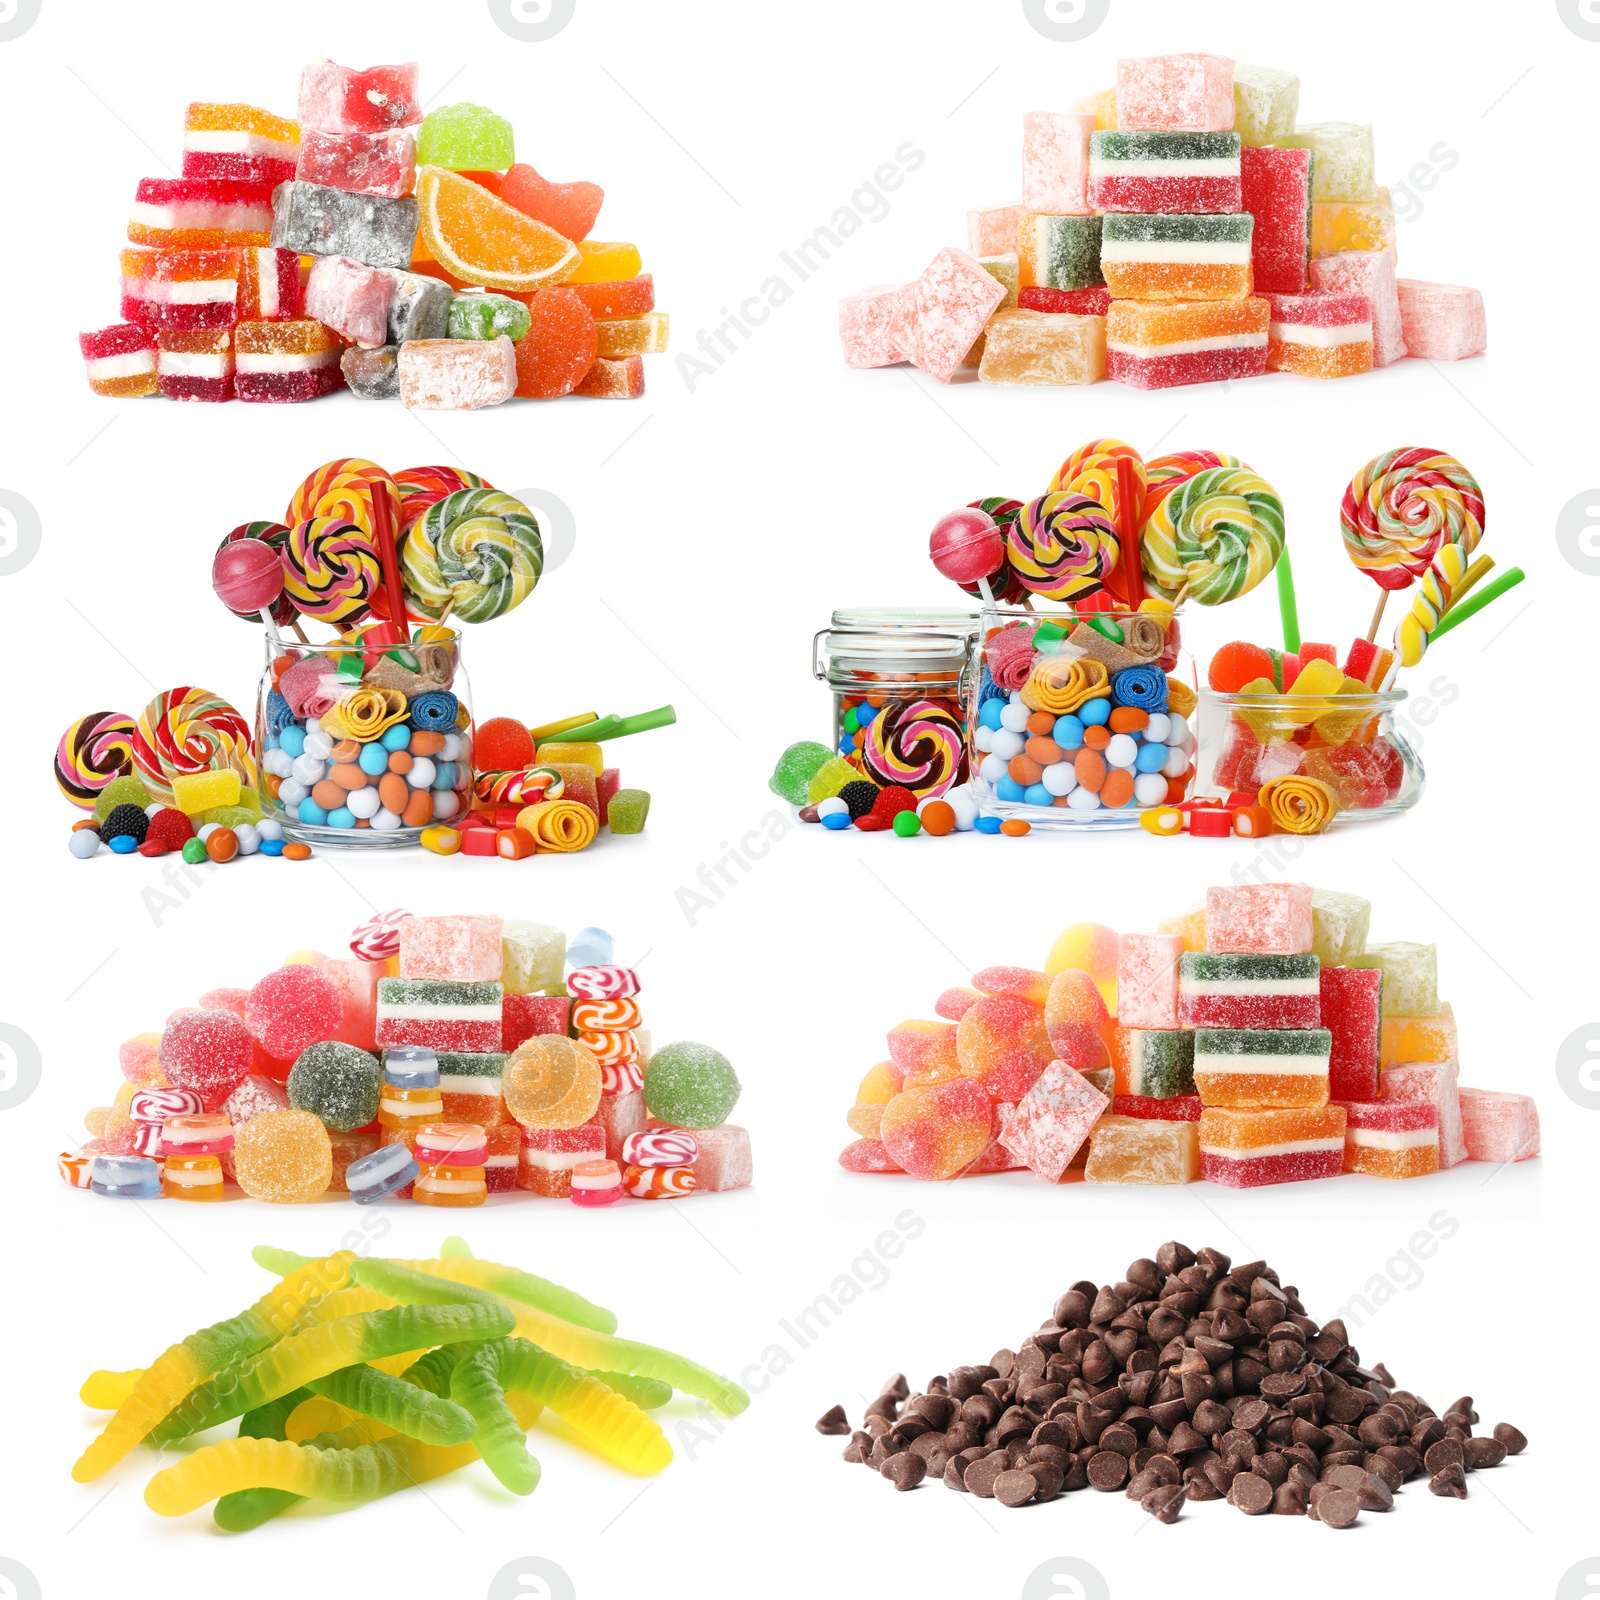 Image of Different tasty candies isolated on white, set